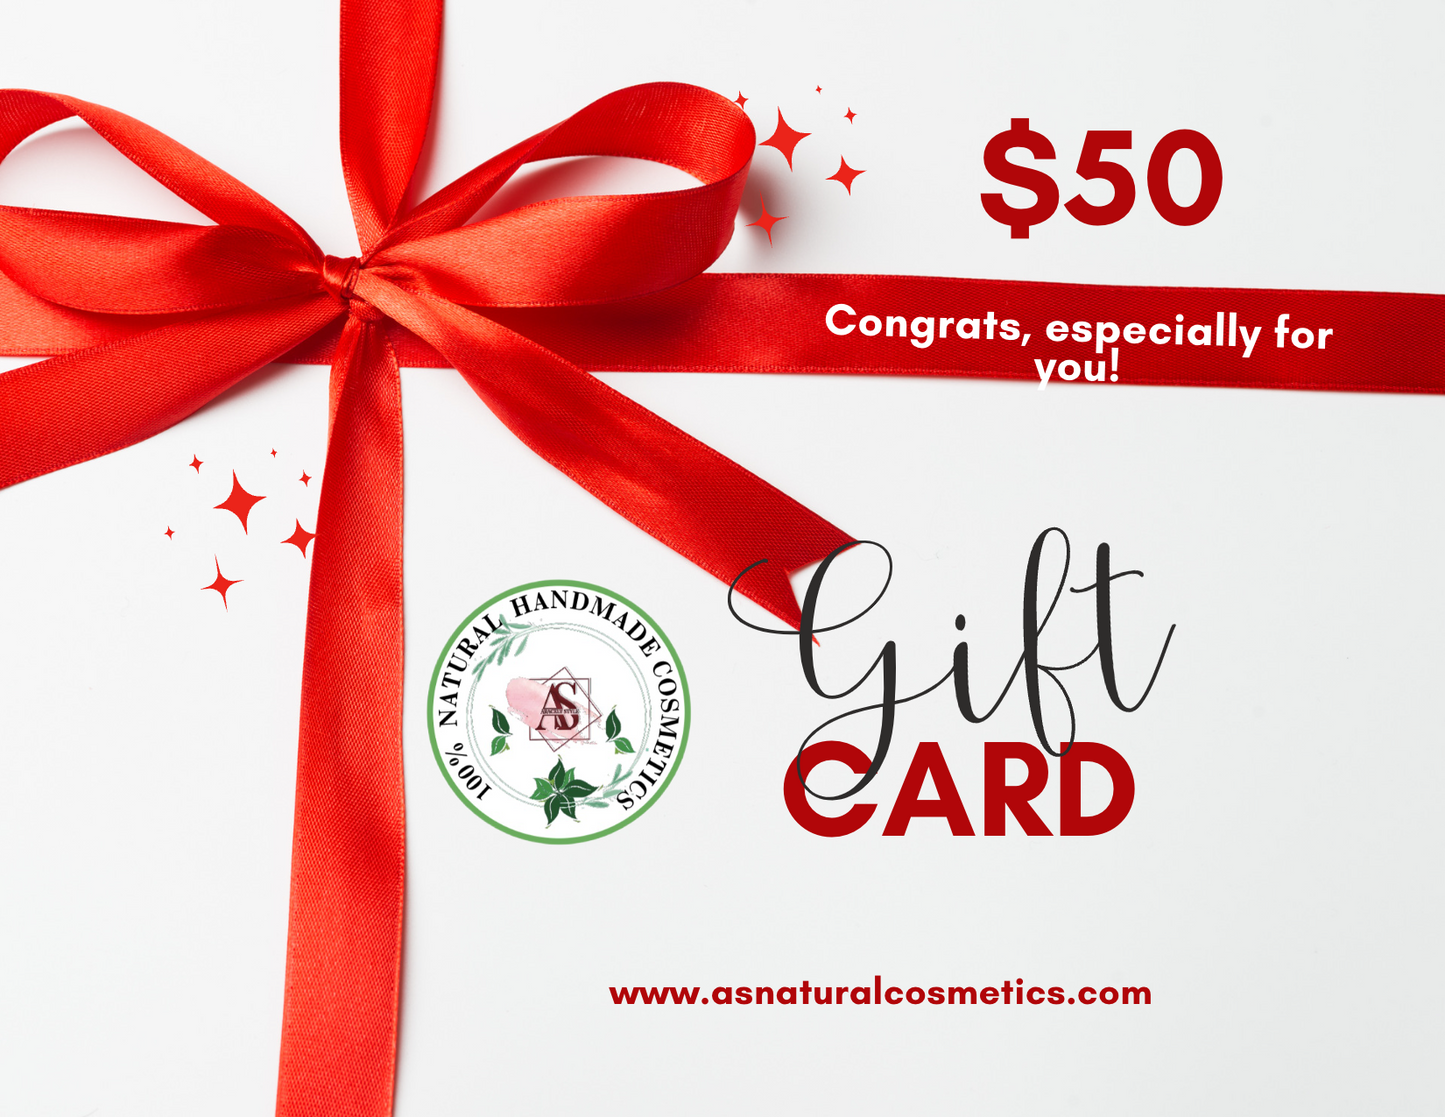 ARACELY STYLE, NATURAL COSMETICS  GIFT CARD